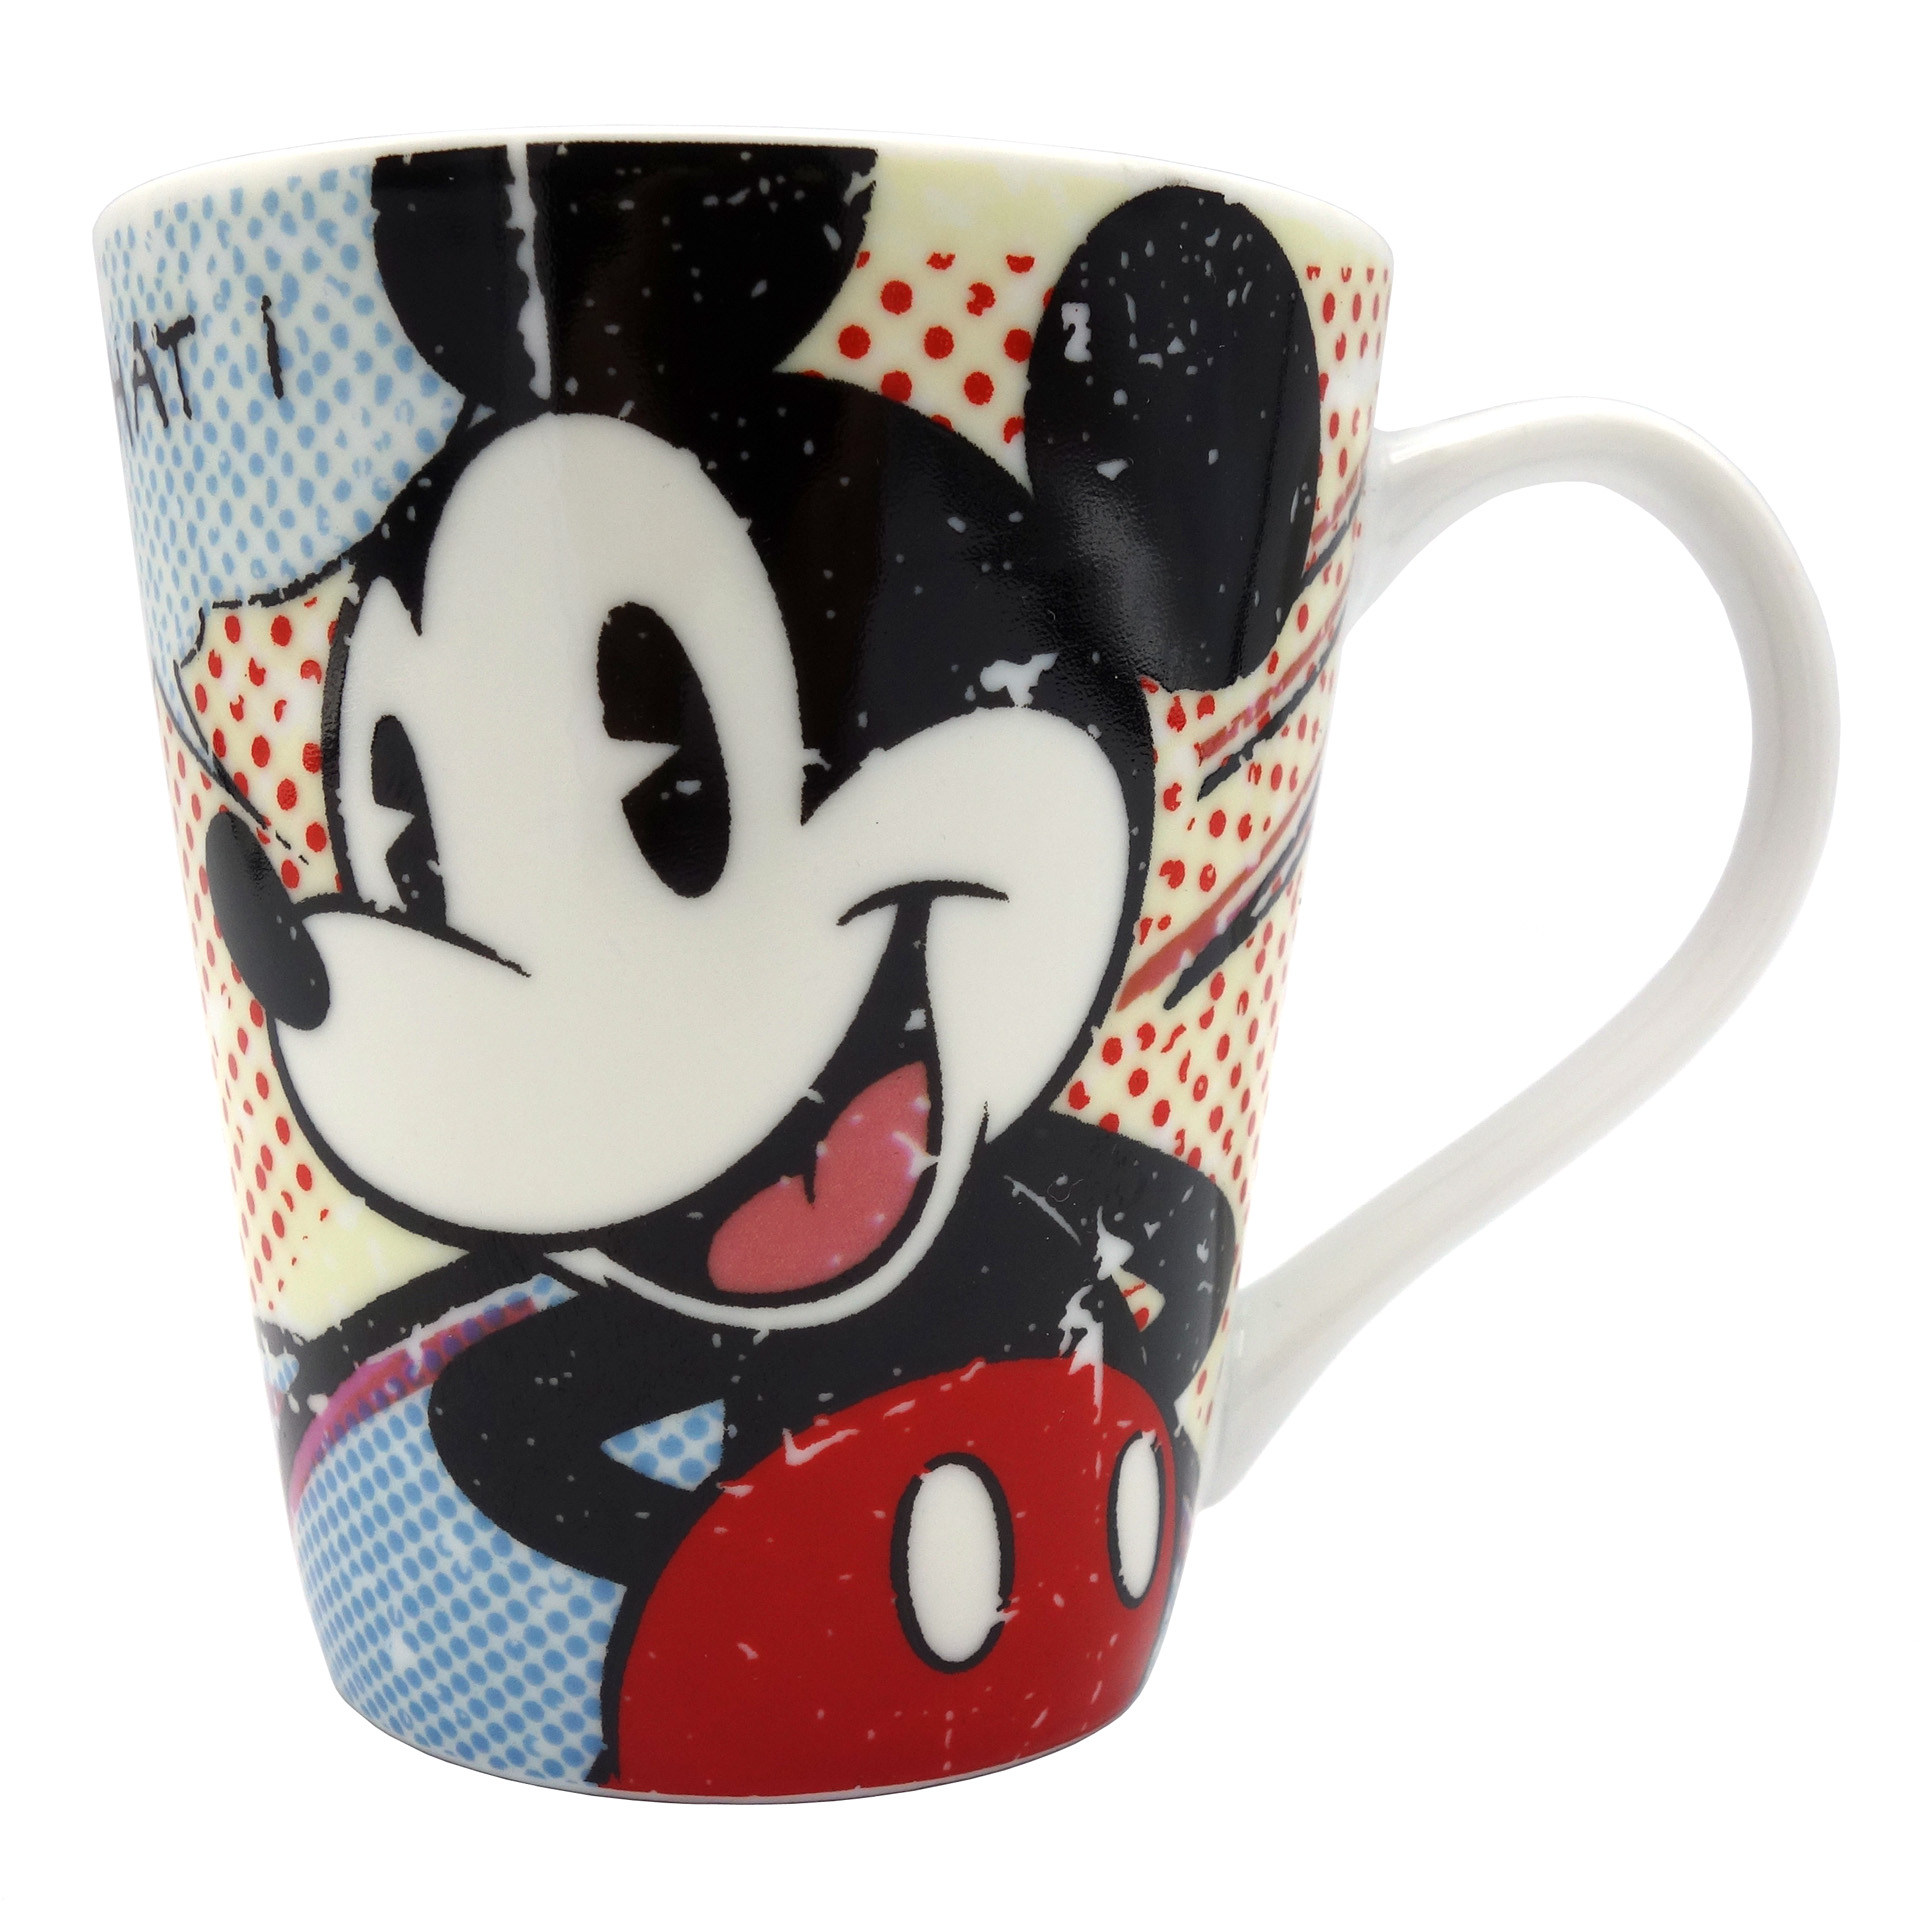 Egan Disney Becher Mickey Mouse "That's What I Want"